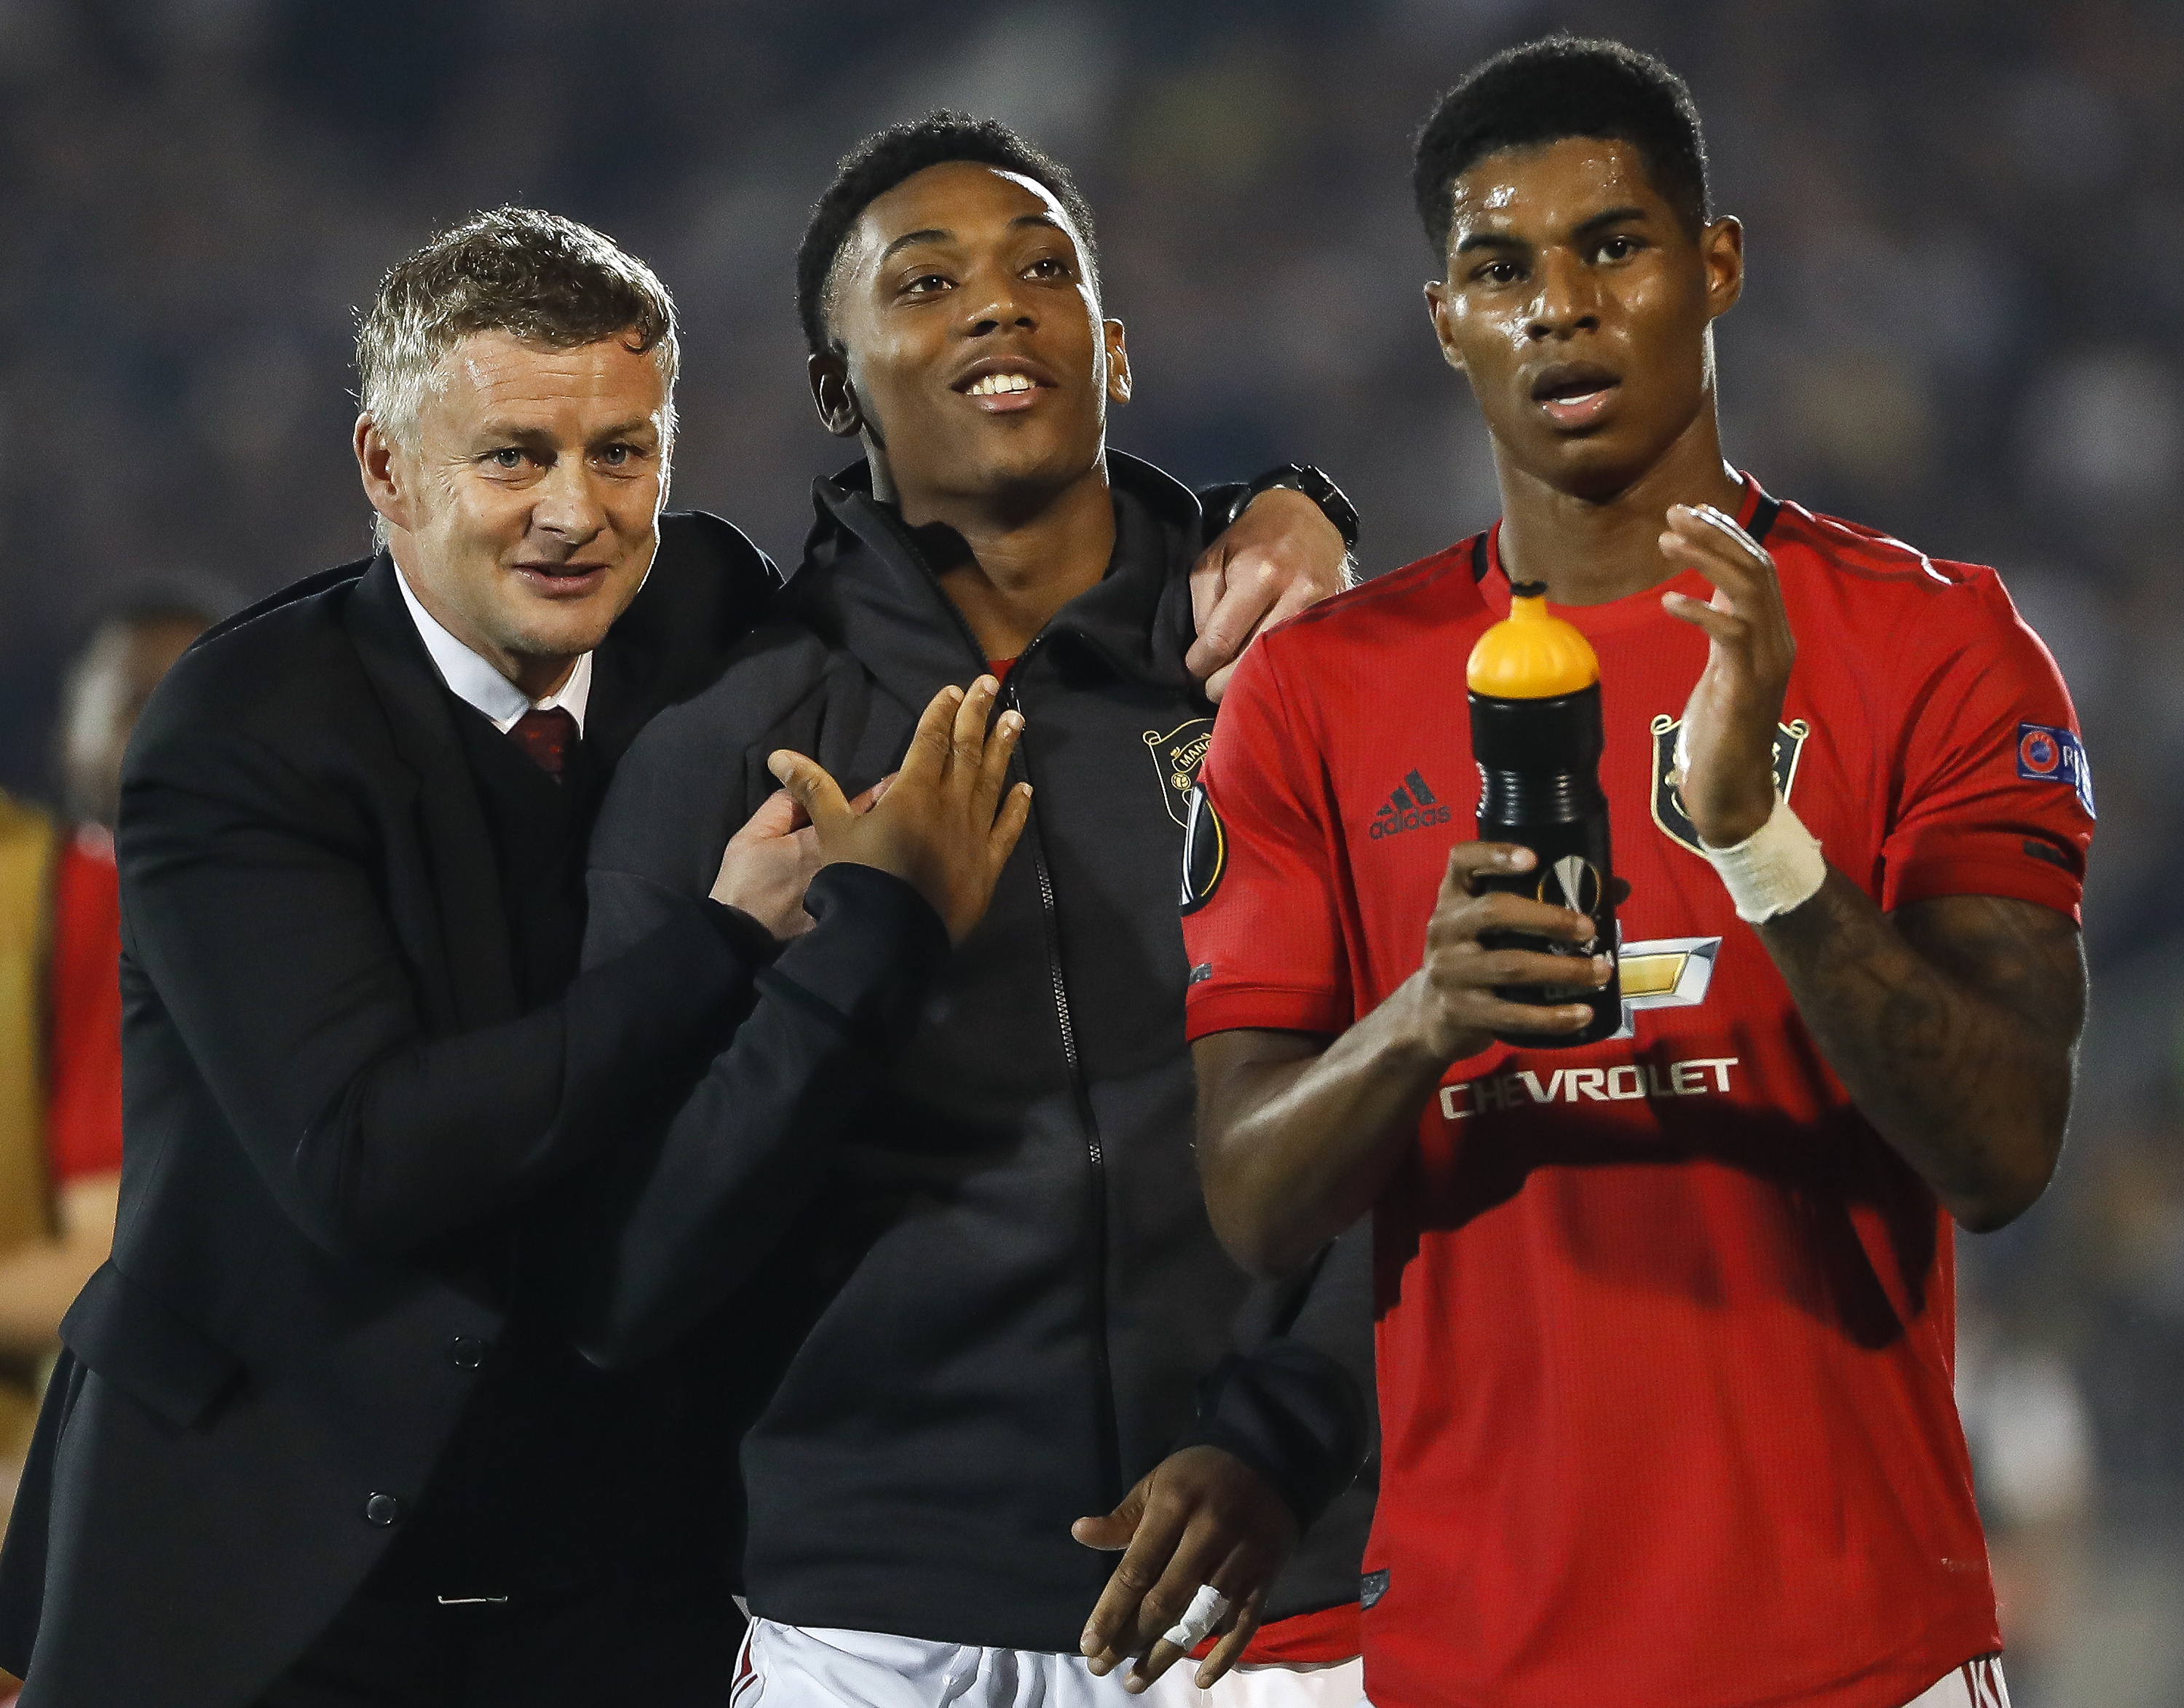 Solskjaer could rest Anthony Martial and Marcus Rashford against Norwich. (Photo by Srdjan Stevanovic/Getty Images)